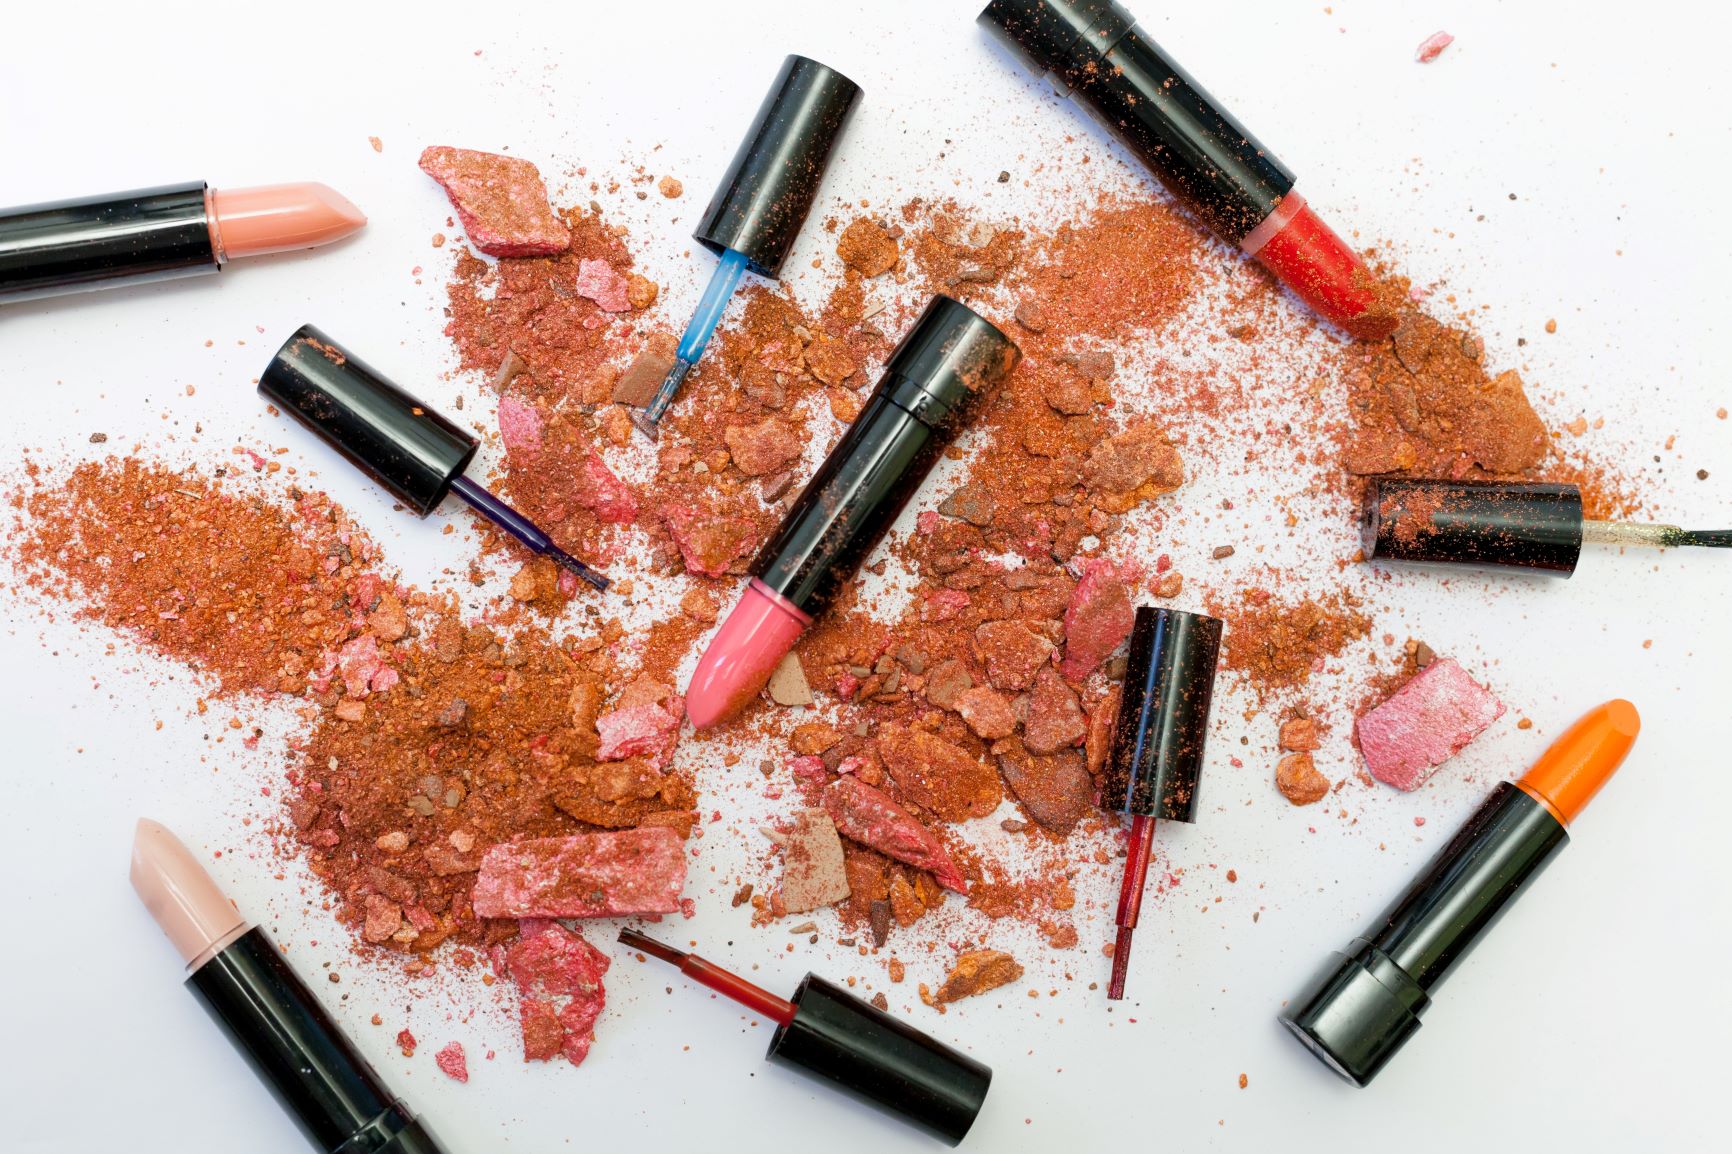 How to start a makeup business in South Africa